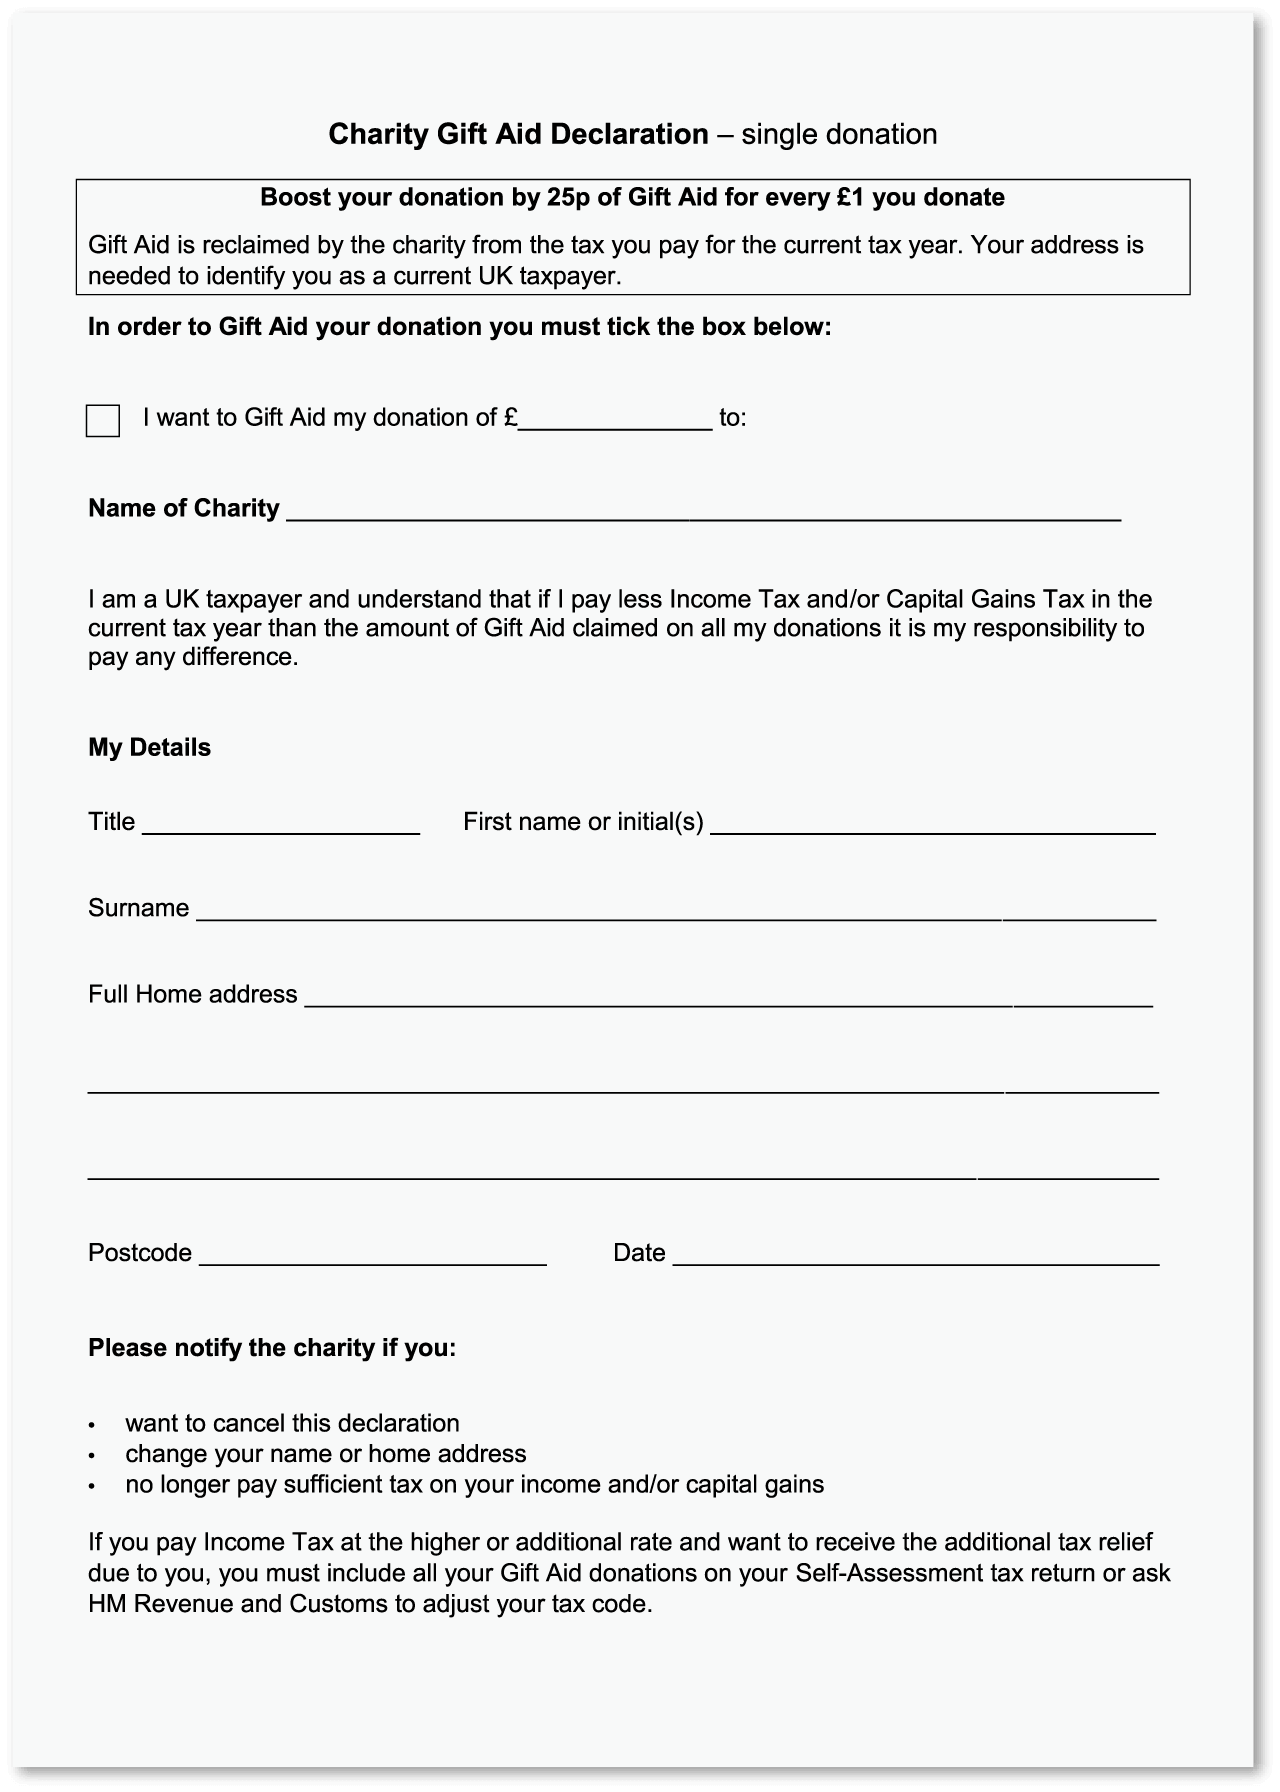 Image of a single Gift Aid declaration form